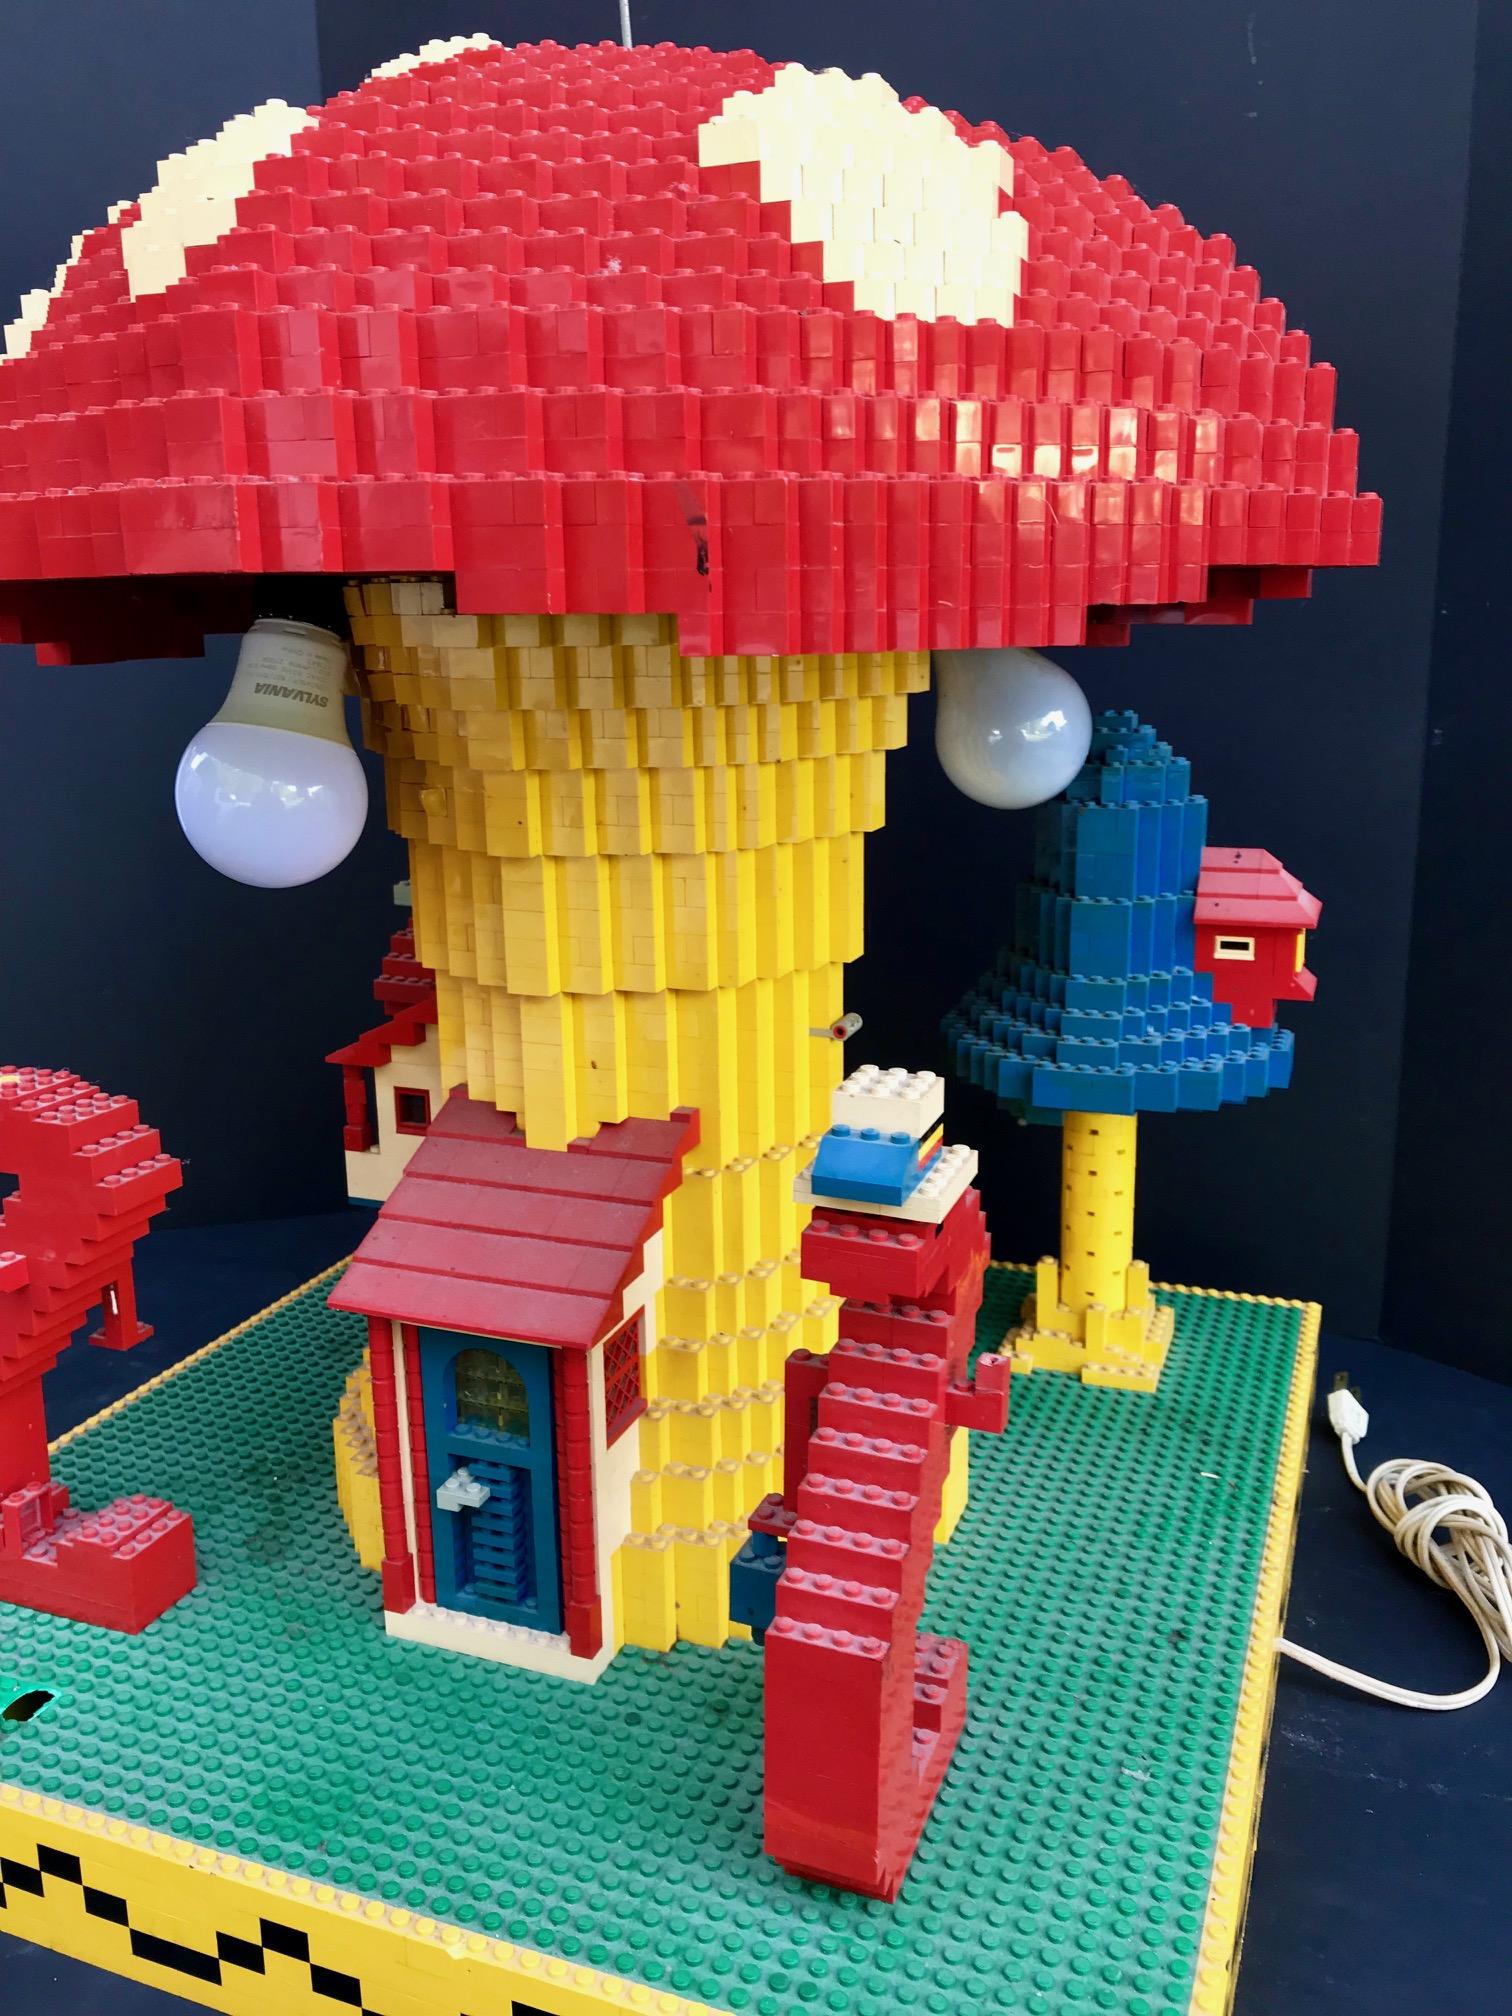 This exclusive sculpture was created and build by Lego architects solely for advertising purposes. This elaborate construction with hundreds of pieces is glued together. This mushroom lamp is not only one of the top Lego creations it is also one of